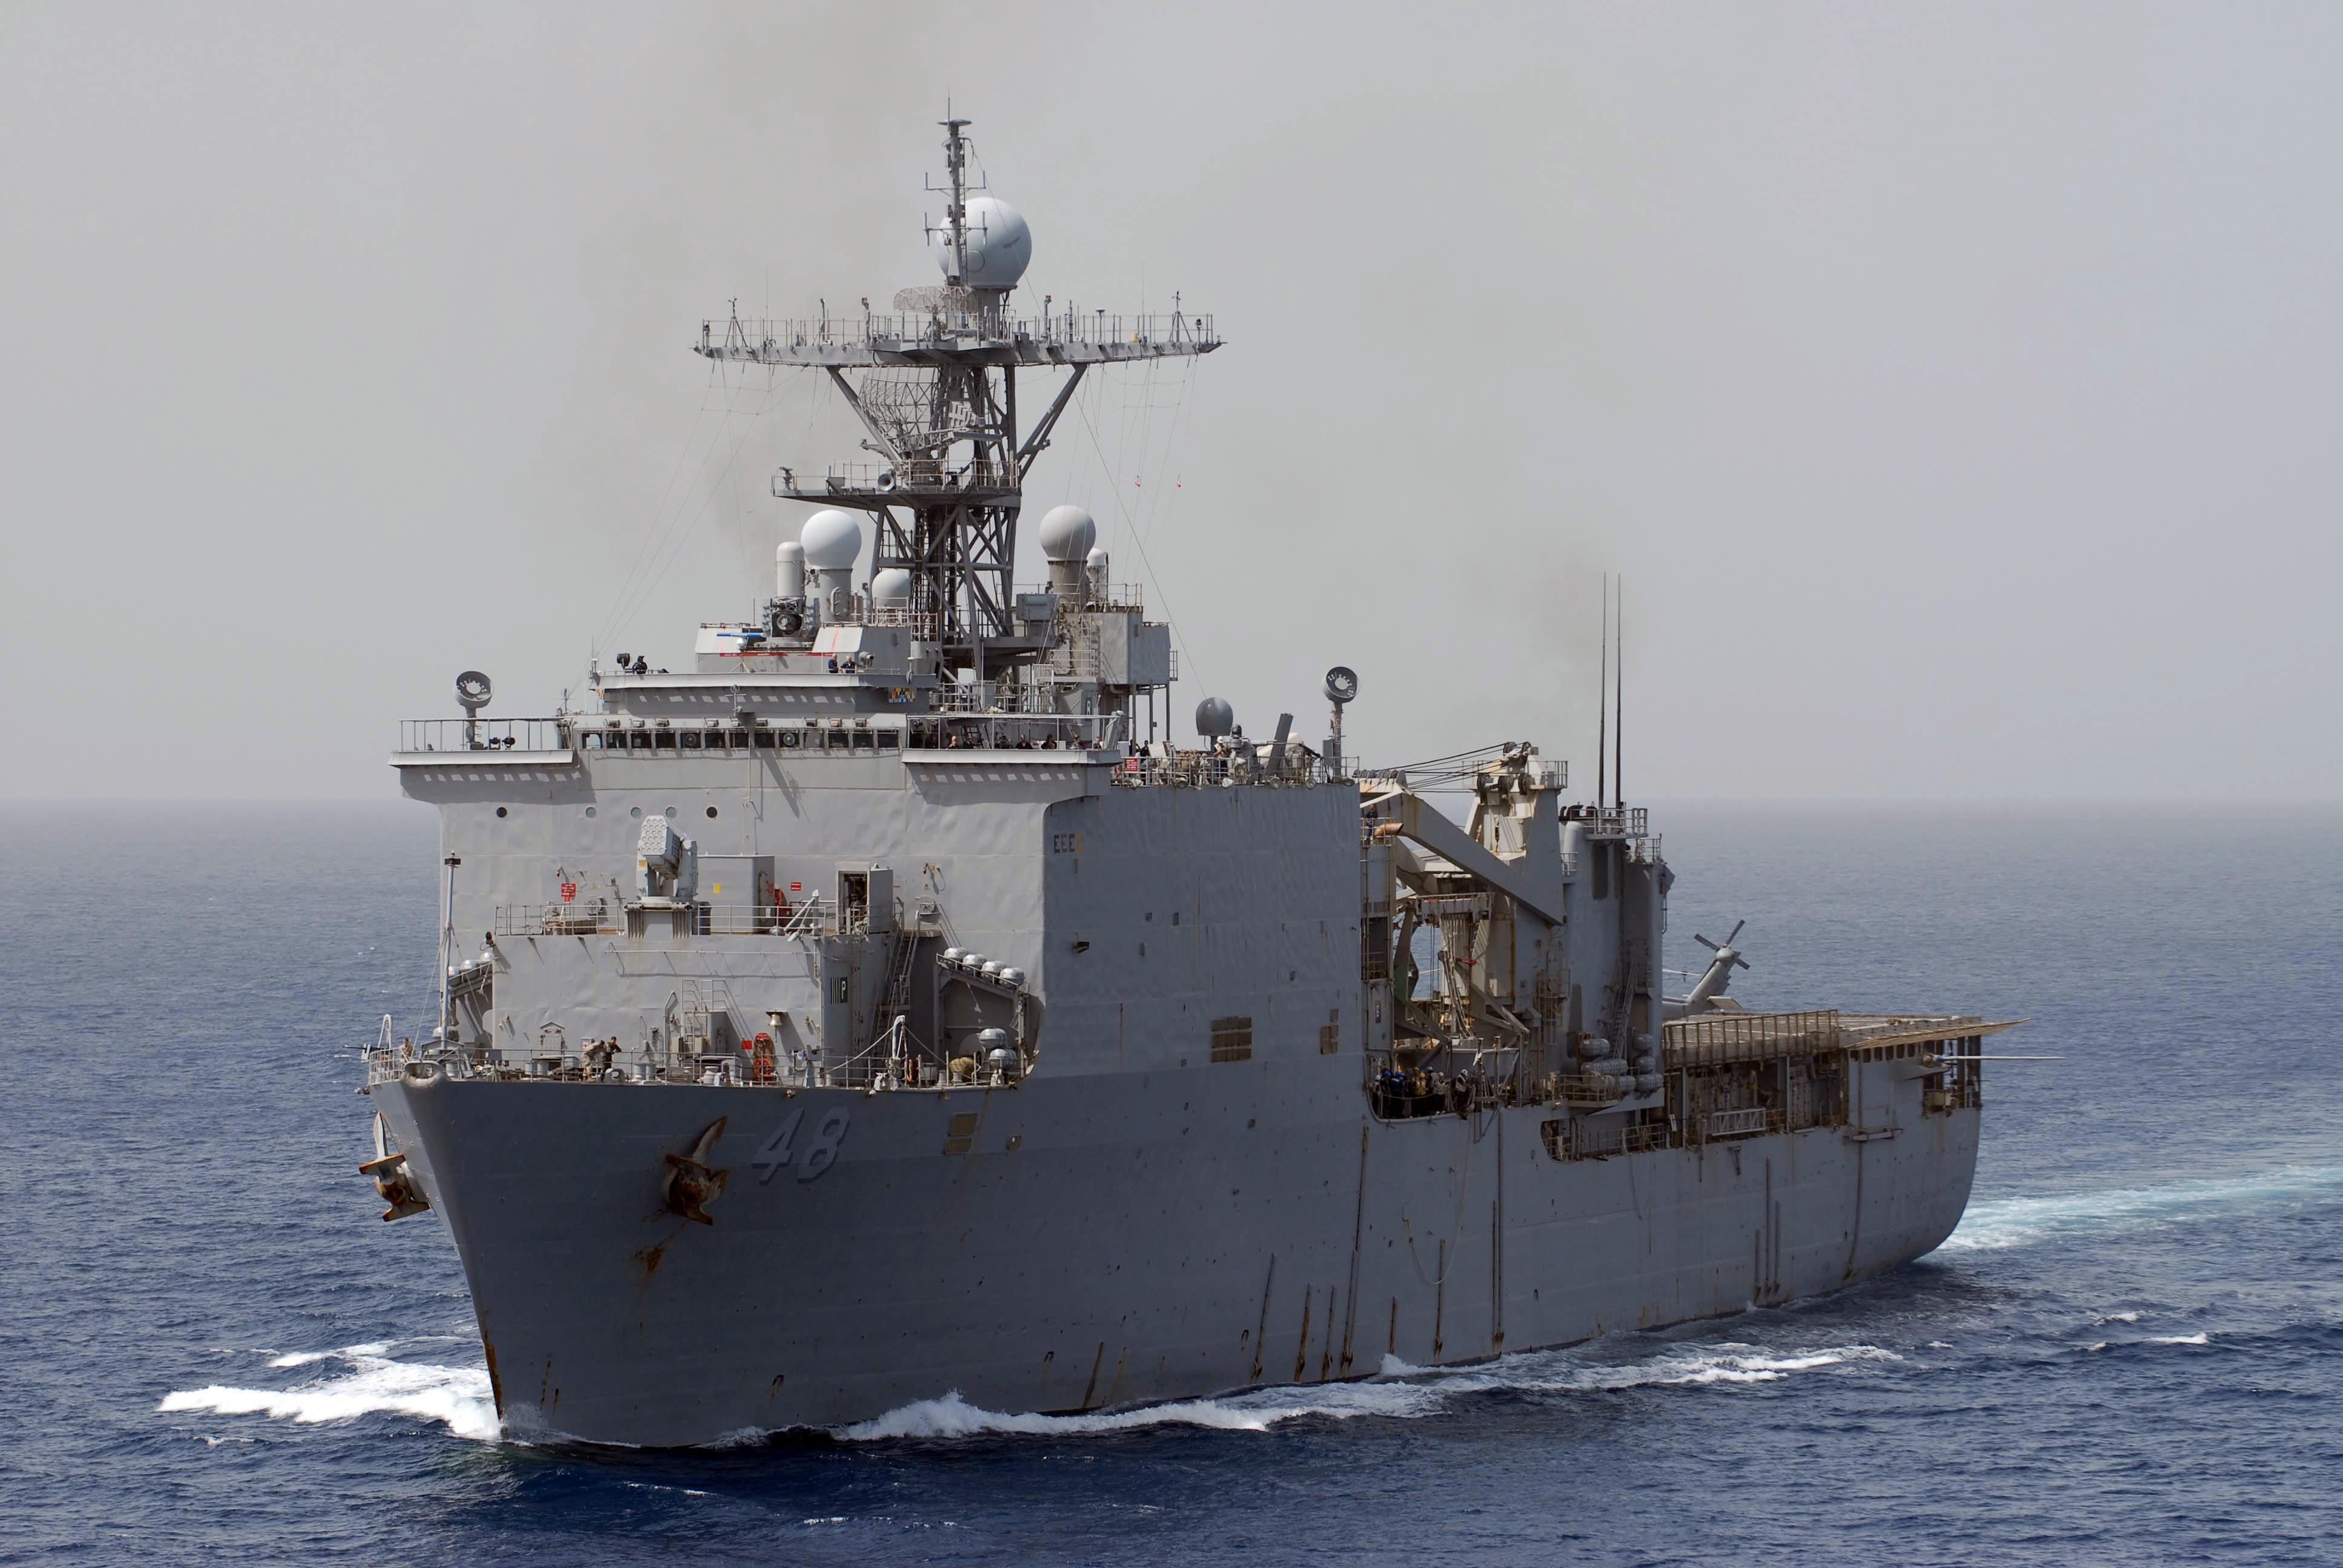 US_Navy_100228-N-3358S-054_The_amphibious_dock_landing_ship_USS_Ashland_%28LSD_48%29_prepares_for_an_underway_replenishment_with_the_Military_Sealift_Command_dry_cargo_and_ammunition_ship_USNS_Robert_E._Peary_%28T-AKE_5%29.jpg